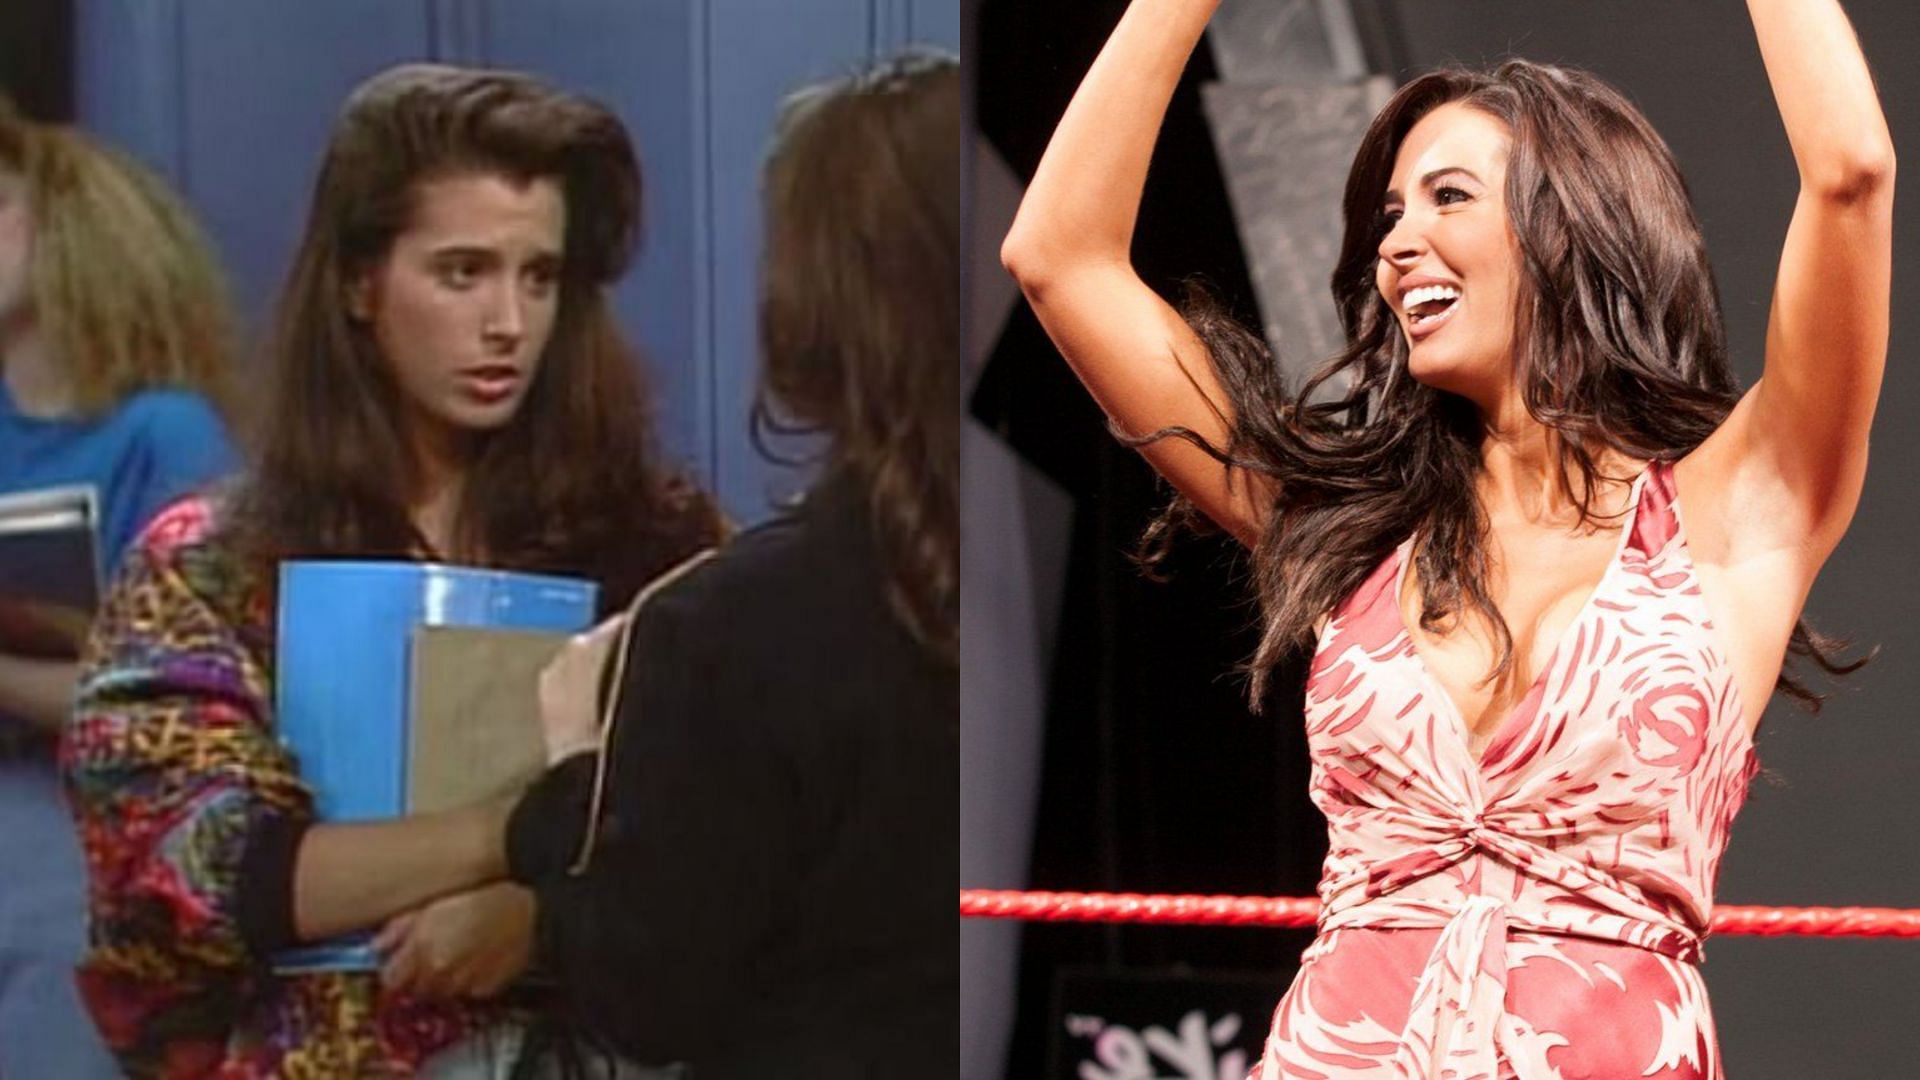 Amy Weber appeared on Saved by the Bell